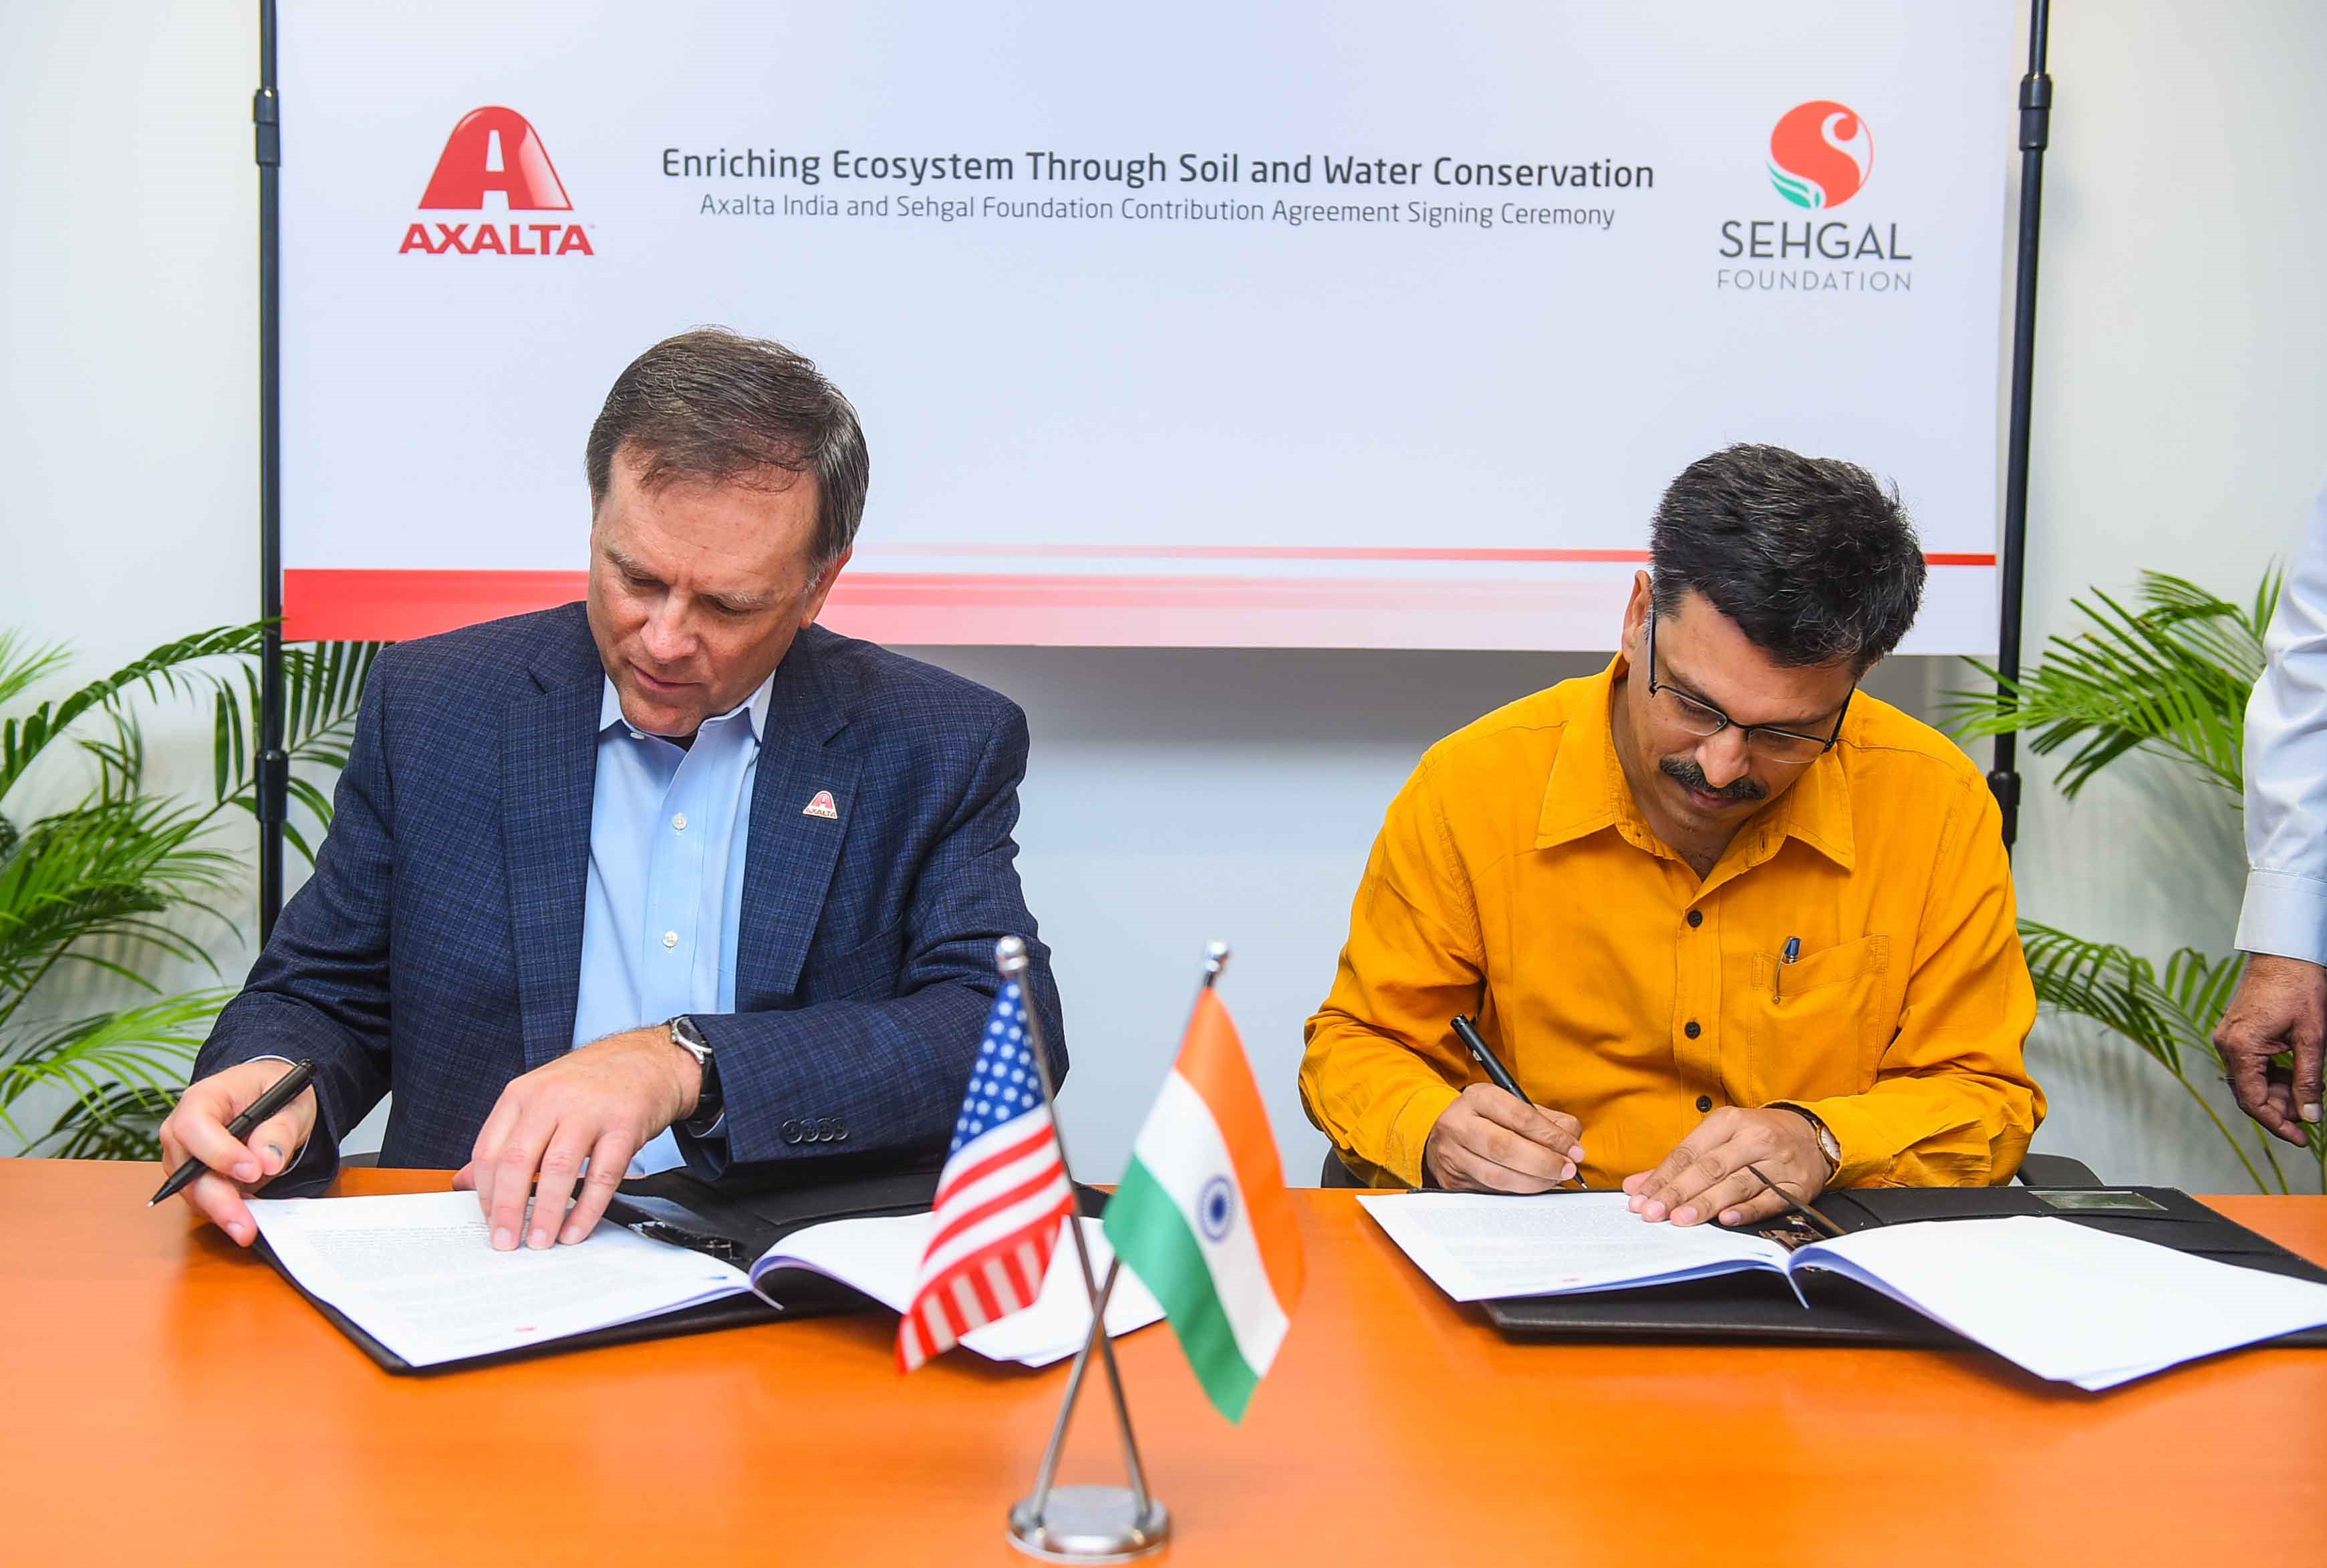 Axalta Chairman and CEO Charlie Shaver signs agreement with Seghal CEO Mr. Ajay Pandey